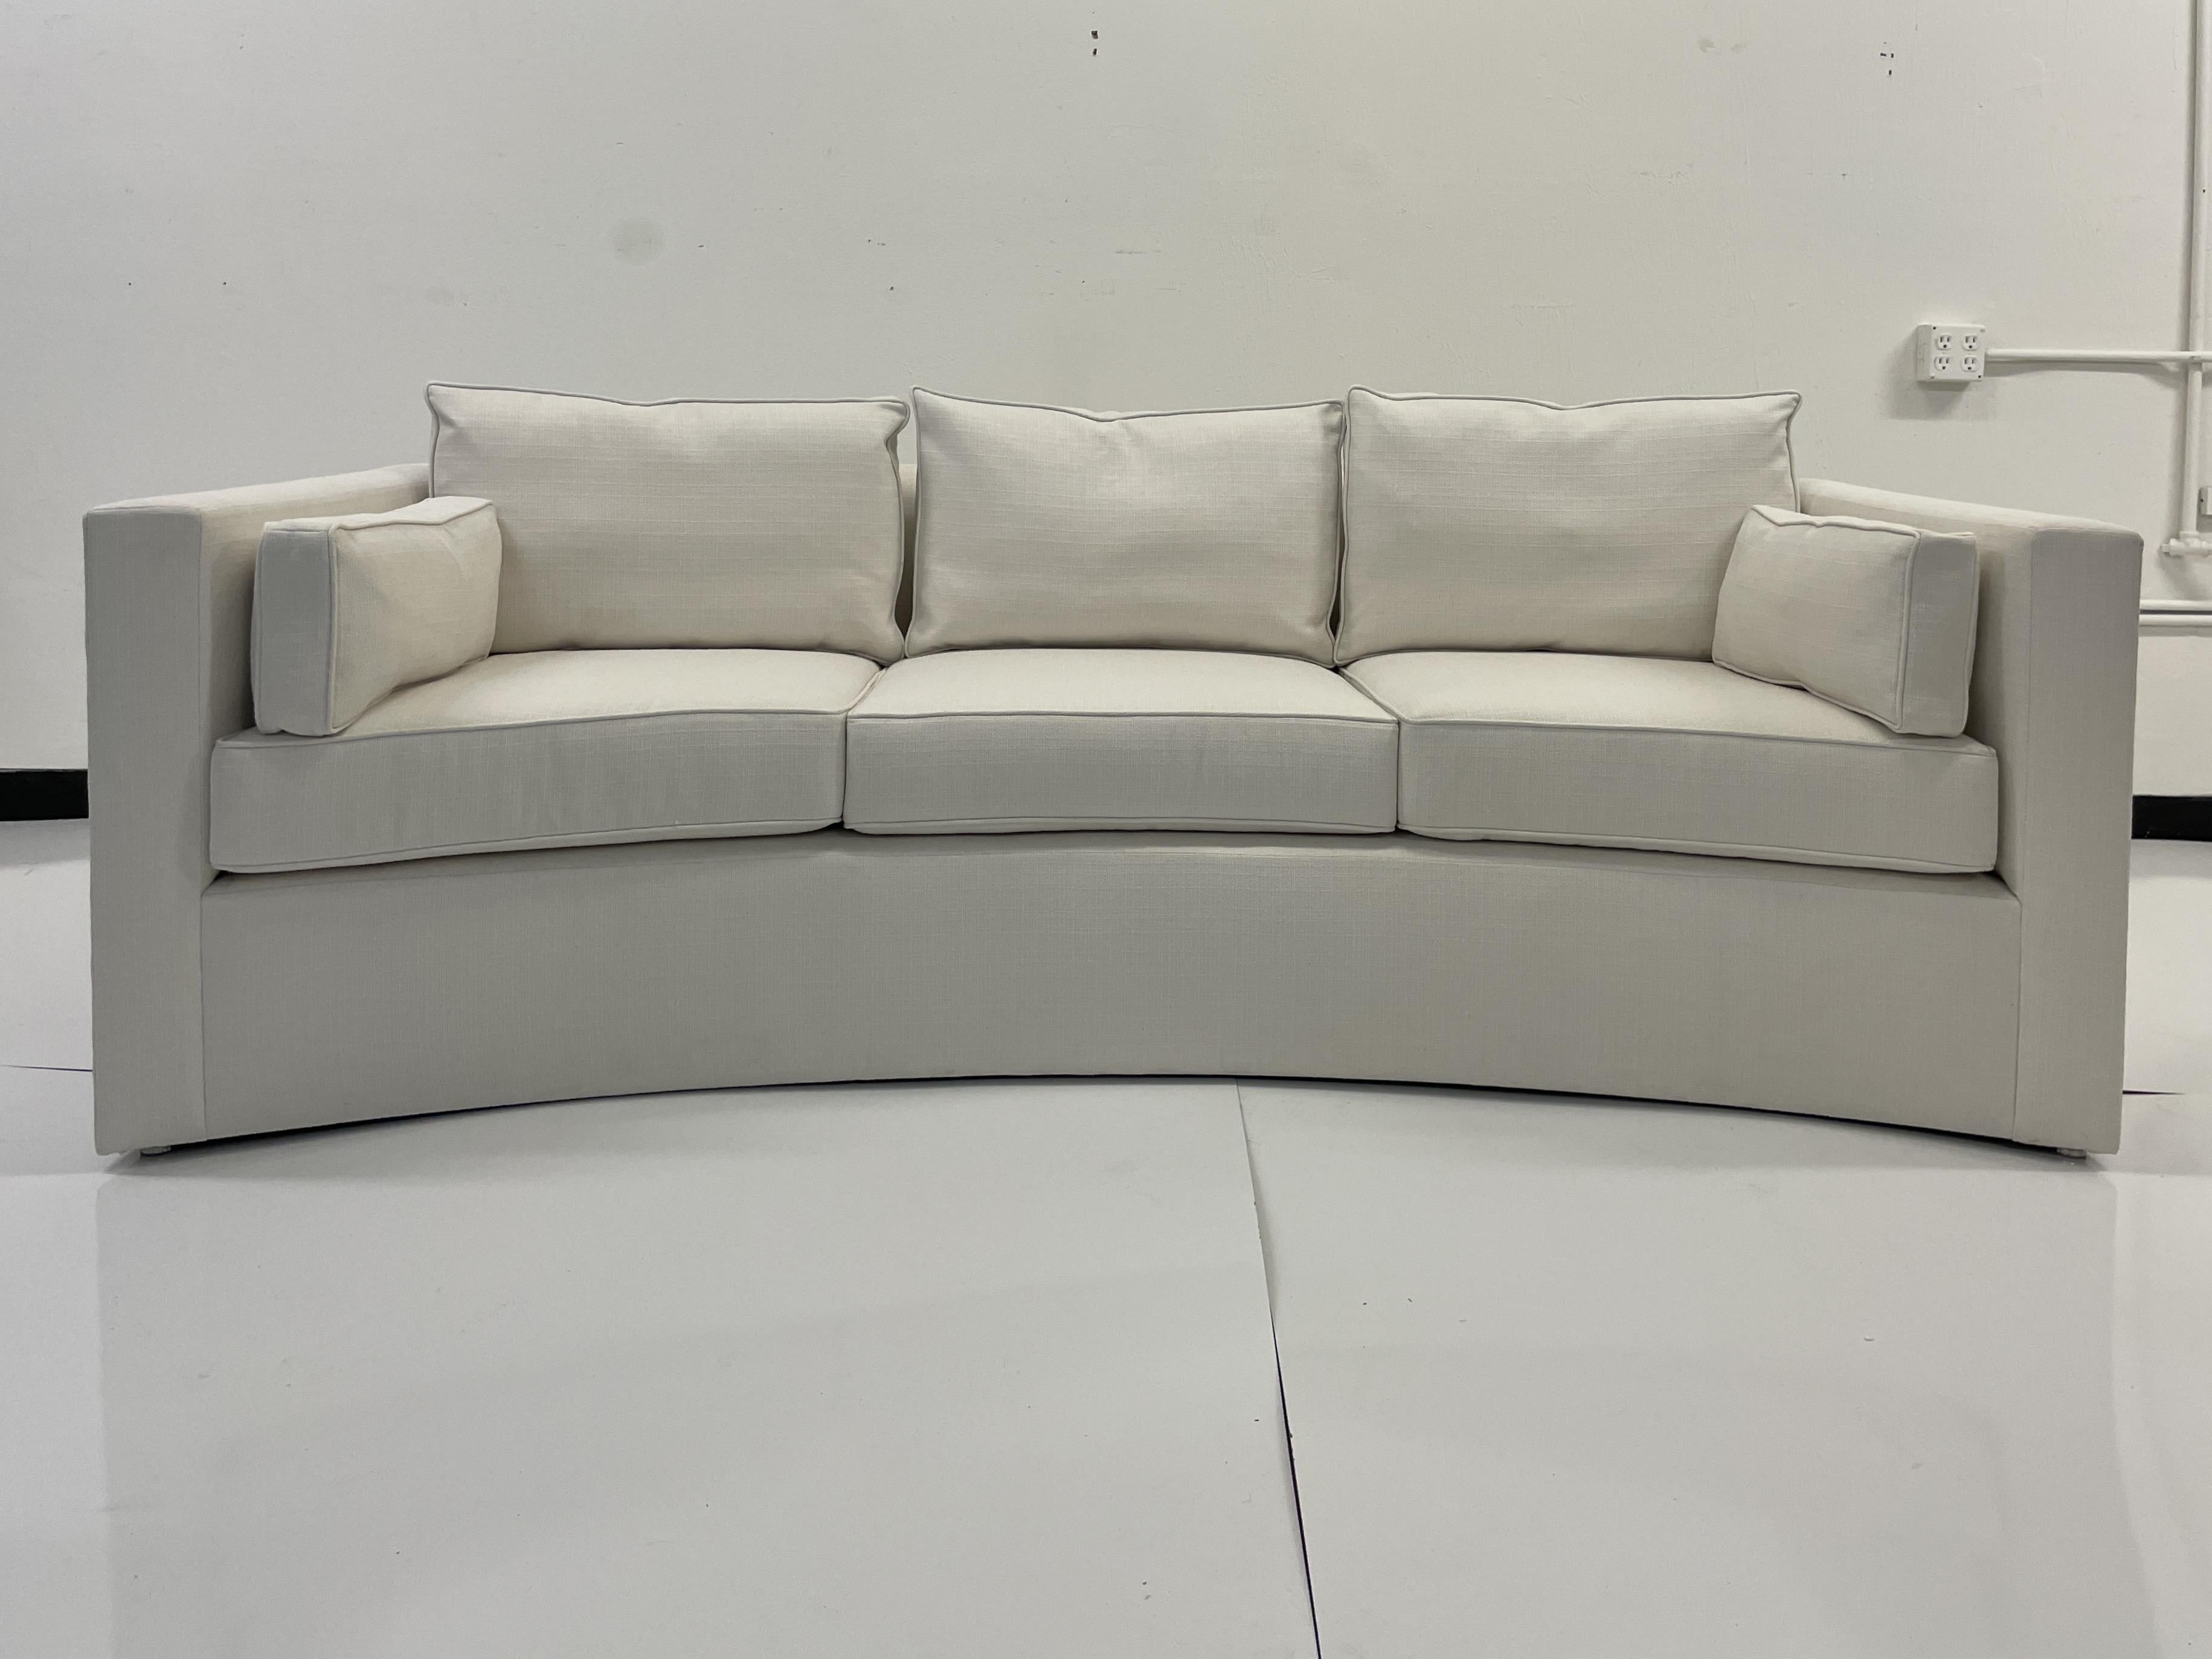 Classic Modern details with fabulous curved shapes designed by Todd Hase. Add some Modern Elements to your Living Space. This classic sofa will work well with many styles of interiors and is upholstered in Todd Hase textiles high performance off